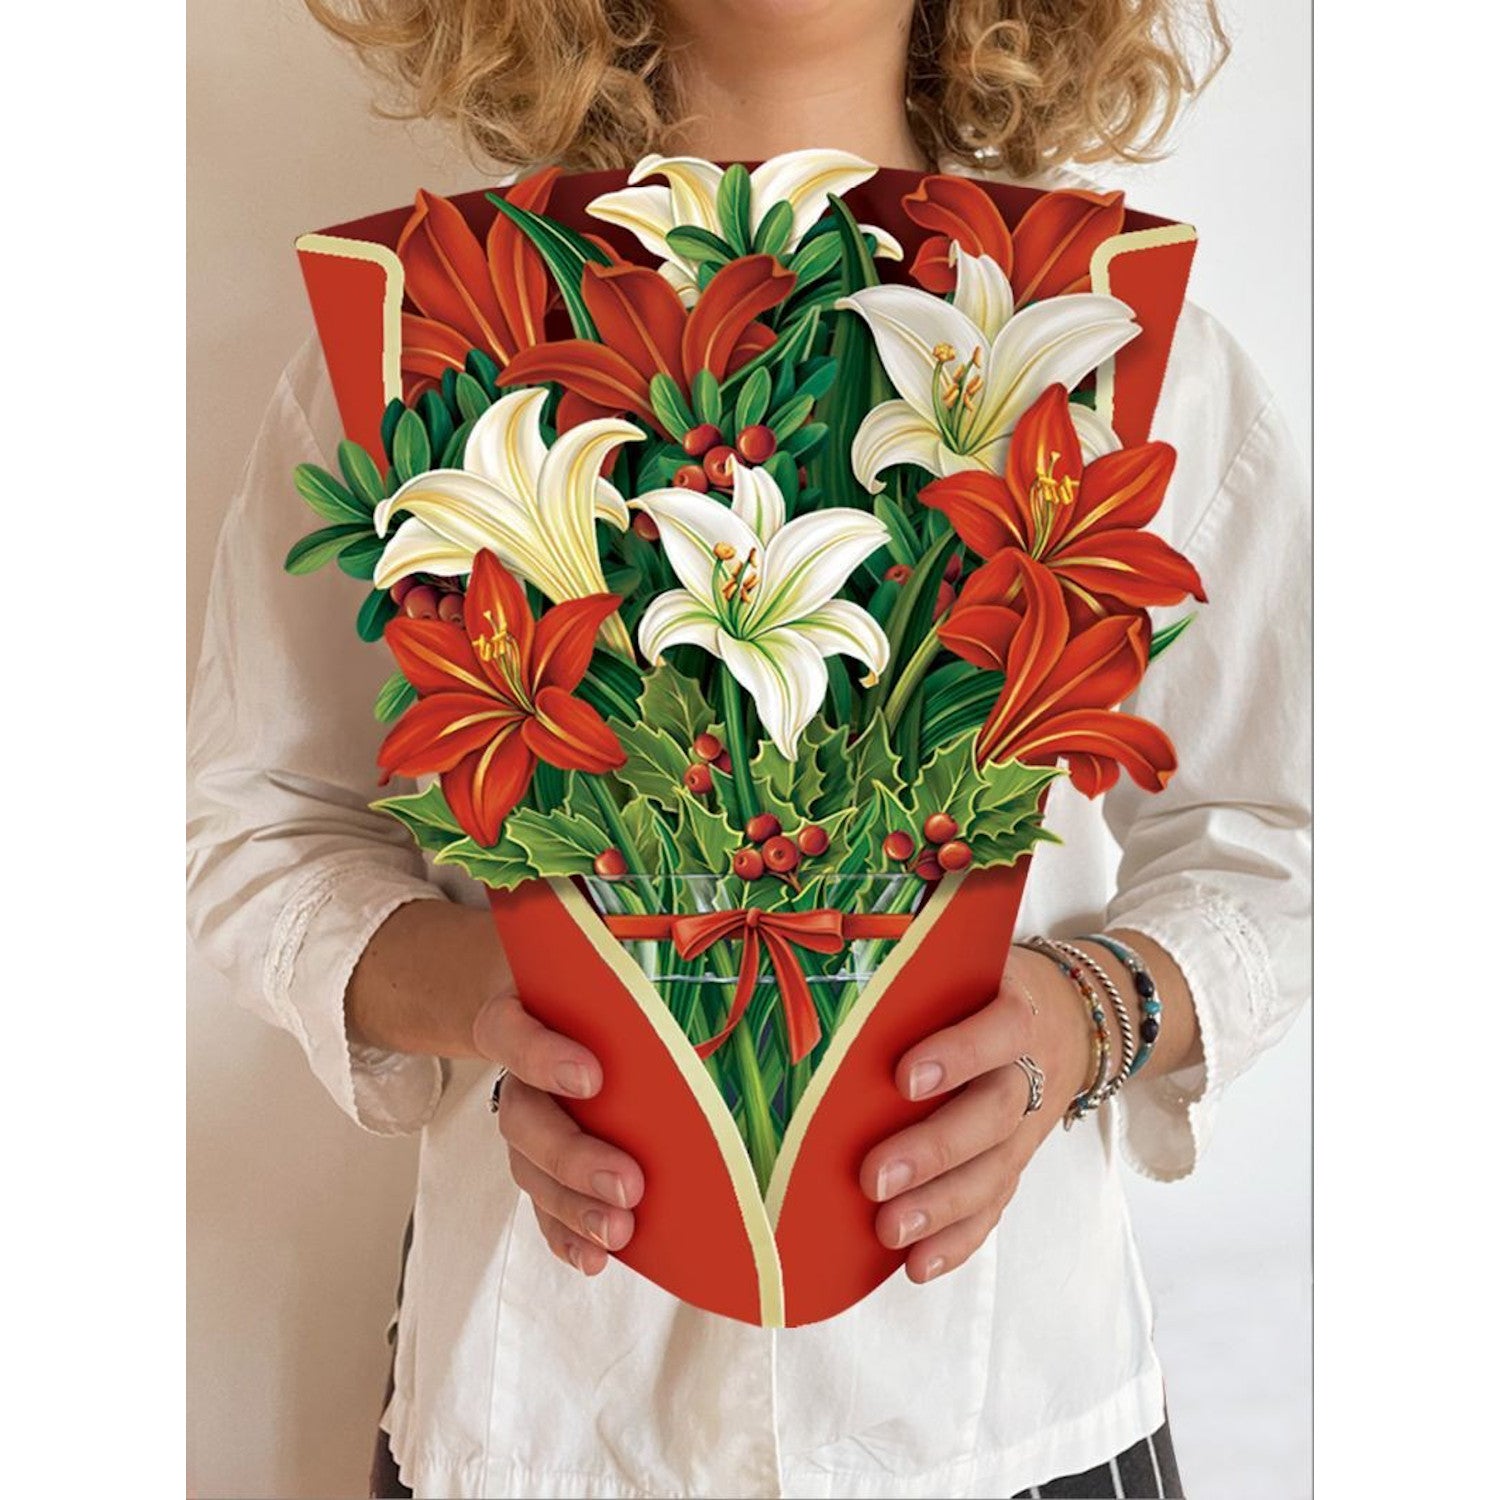 A person holding a large Winter Joy Pop Up Flower Bouquet of white lilies, Amaryllis, and holly branches wrapped in red paper from Fresh Cut Paper.